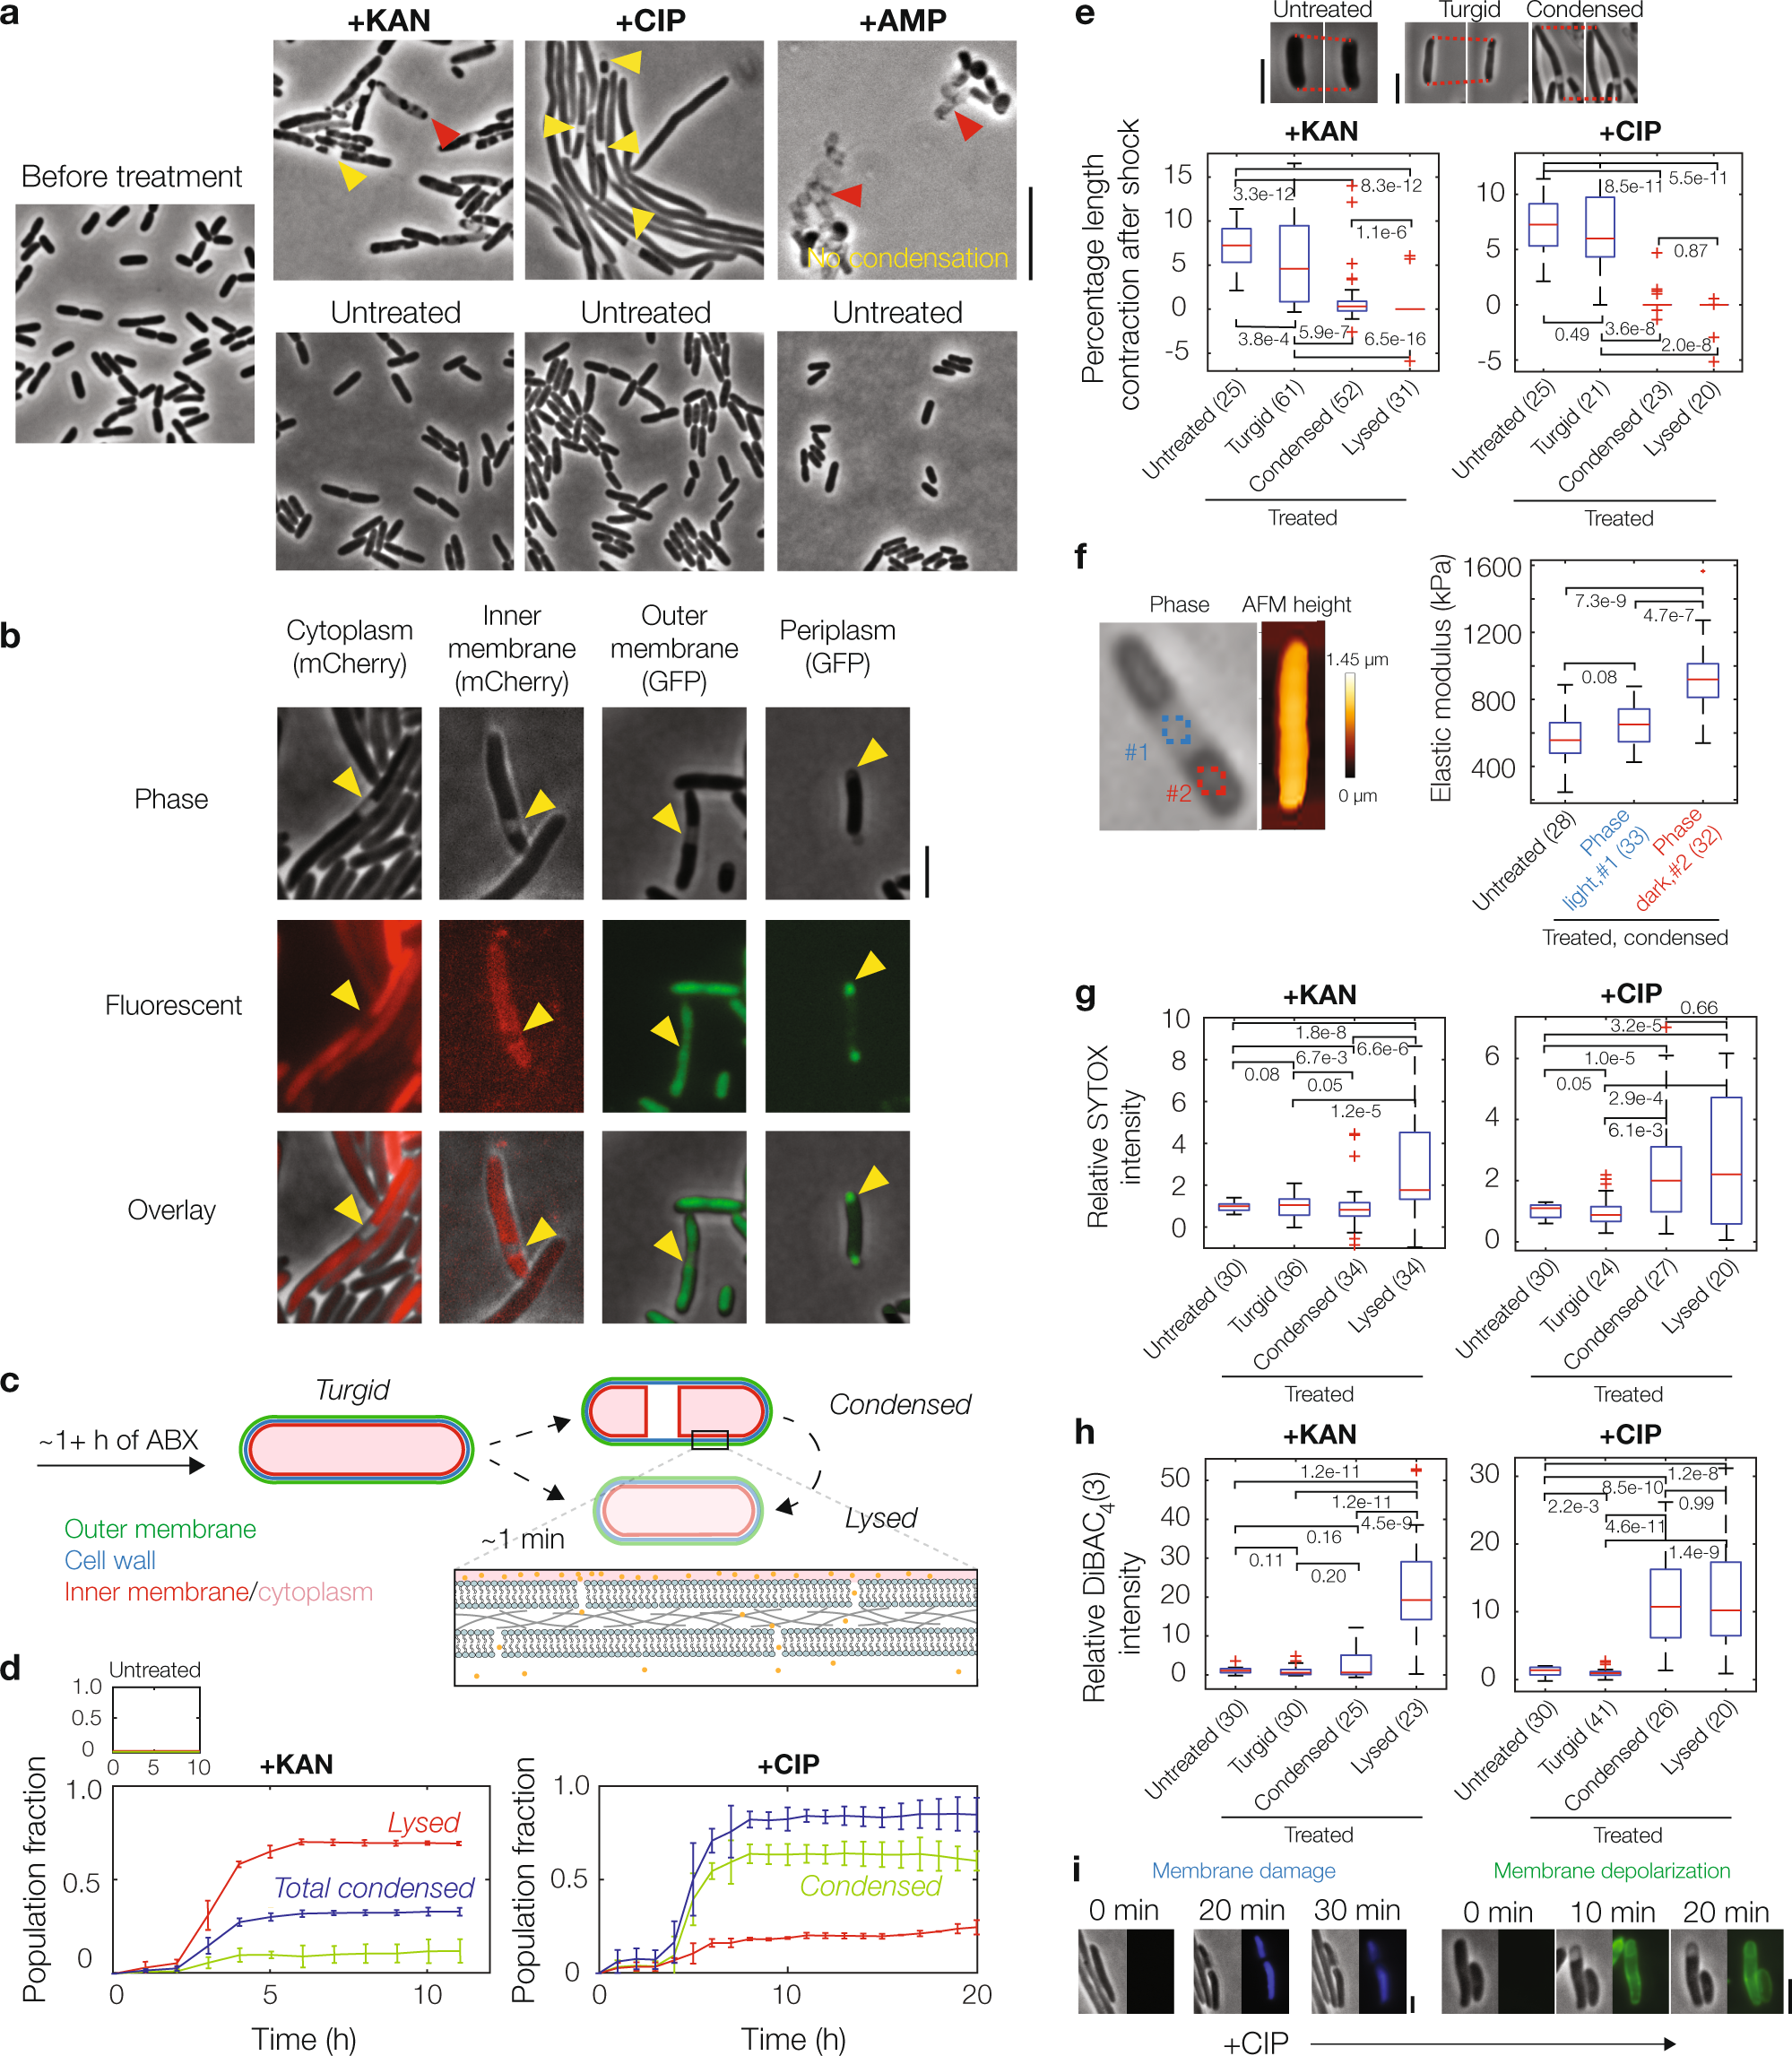 Cytoplasmic condensation by membrane damage is associated with antibiotic lethality | Nature Communications